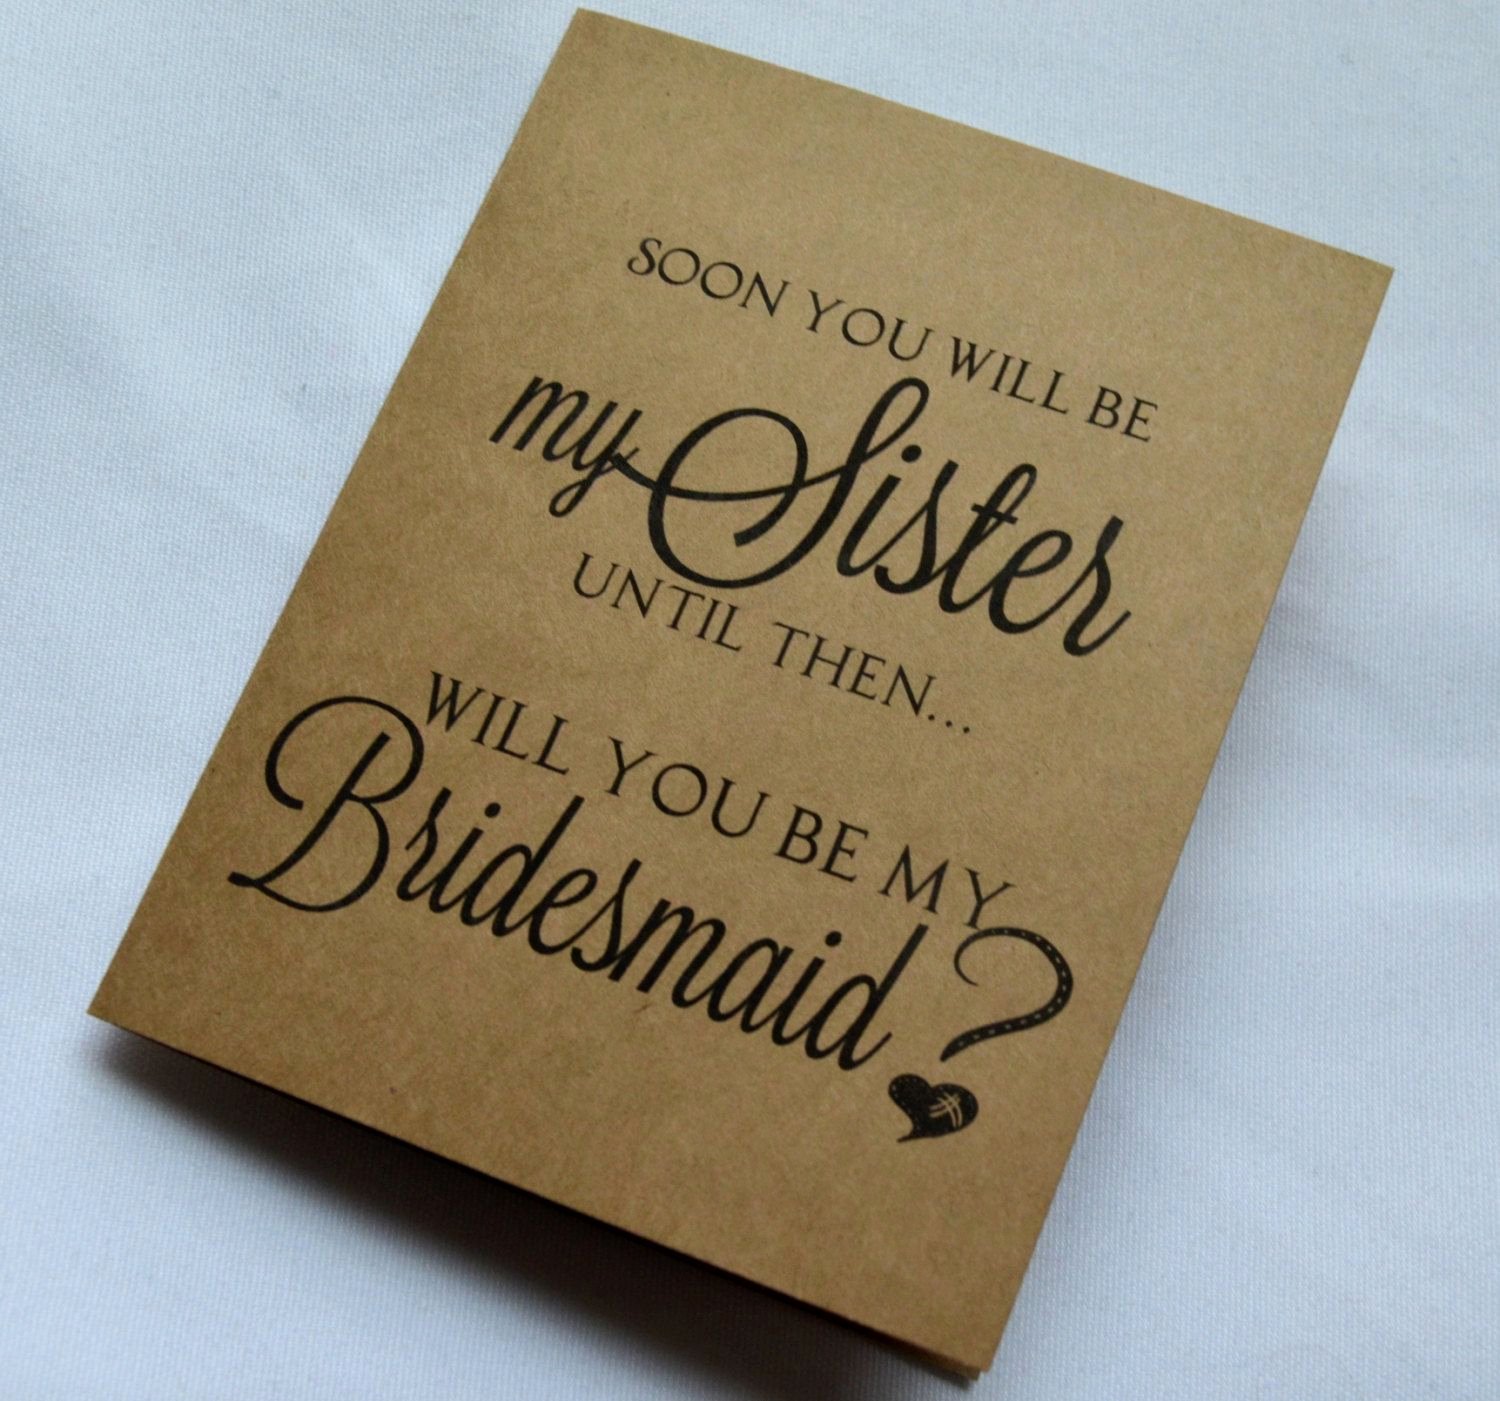 Bridesmaid Proposal Letter Inspirational soon You Will Be My Sister Bridesmaid Card by